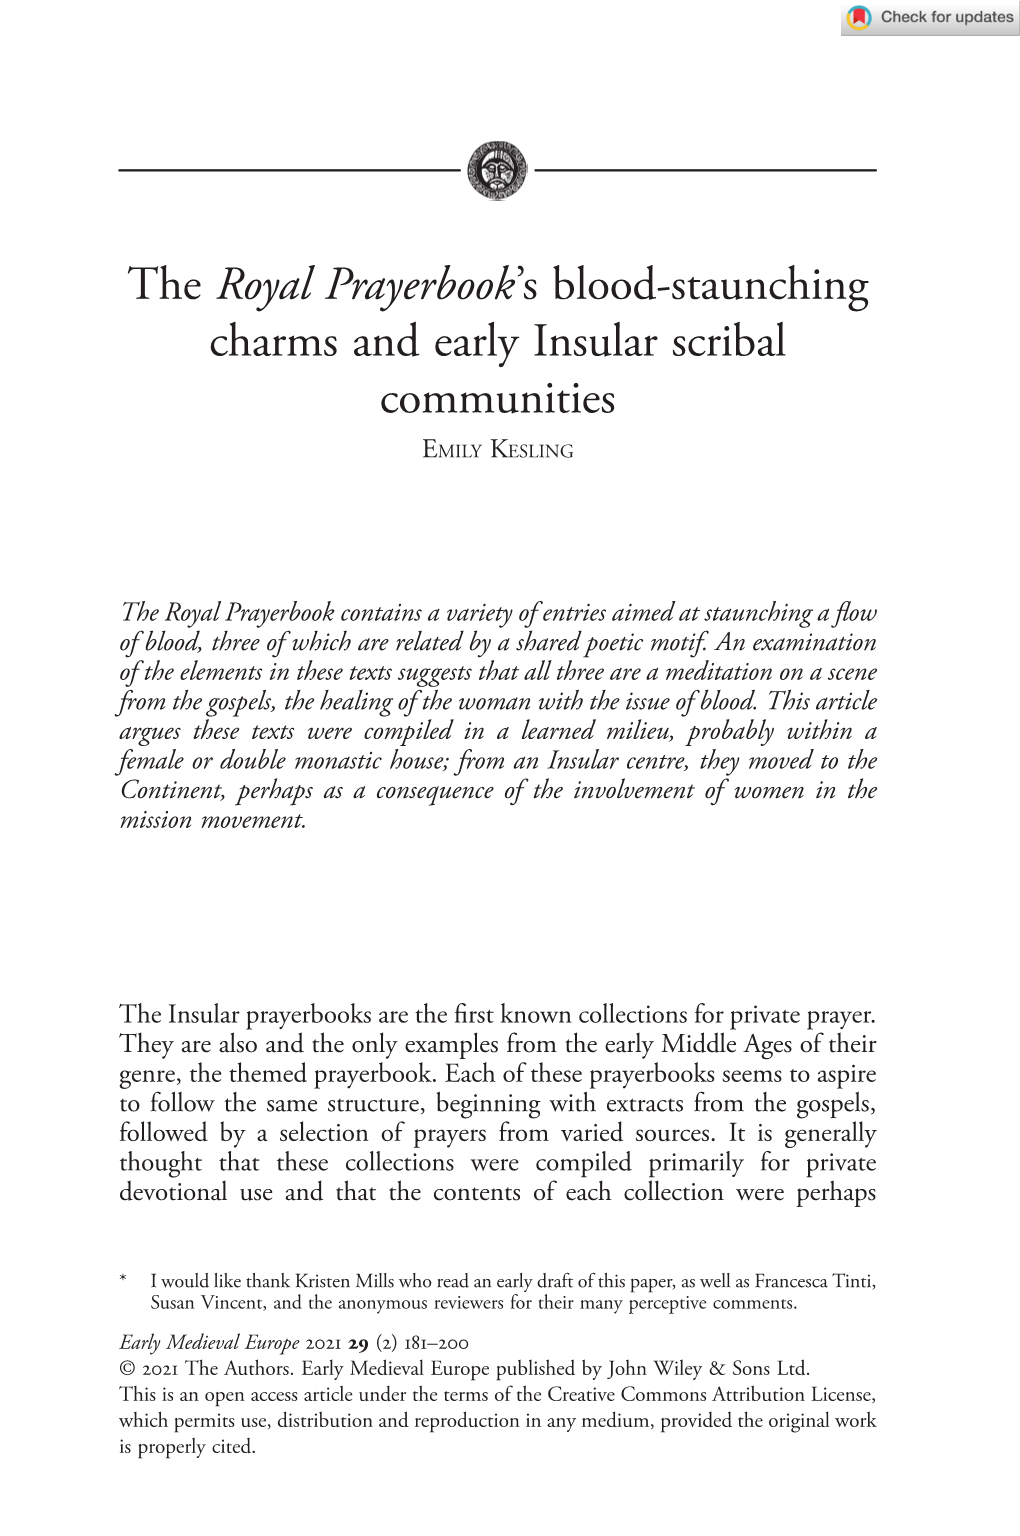 The Royal Prayerbook's Blood‐Staunching Charms and Early Insular Scribal Communities